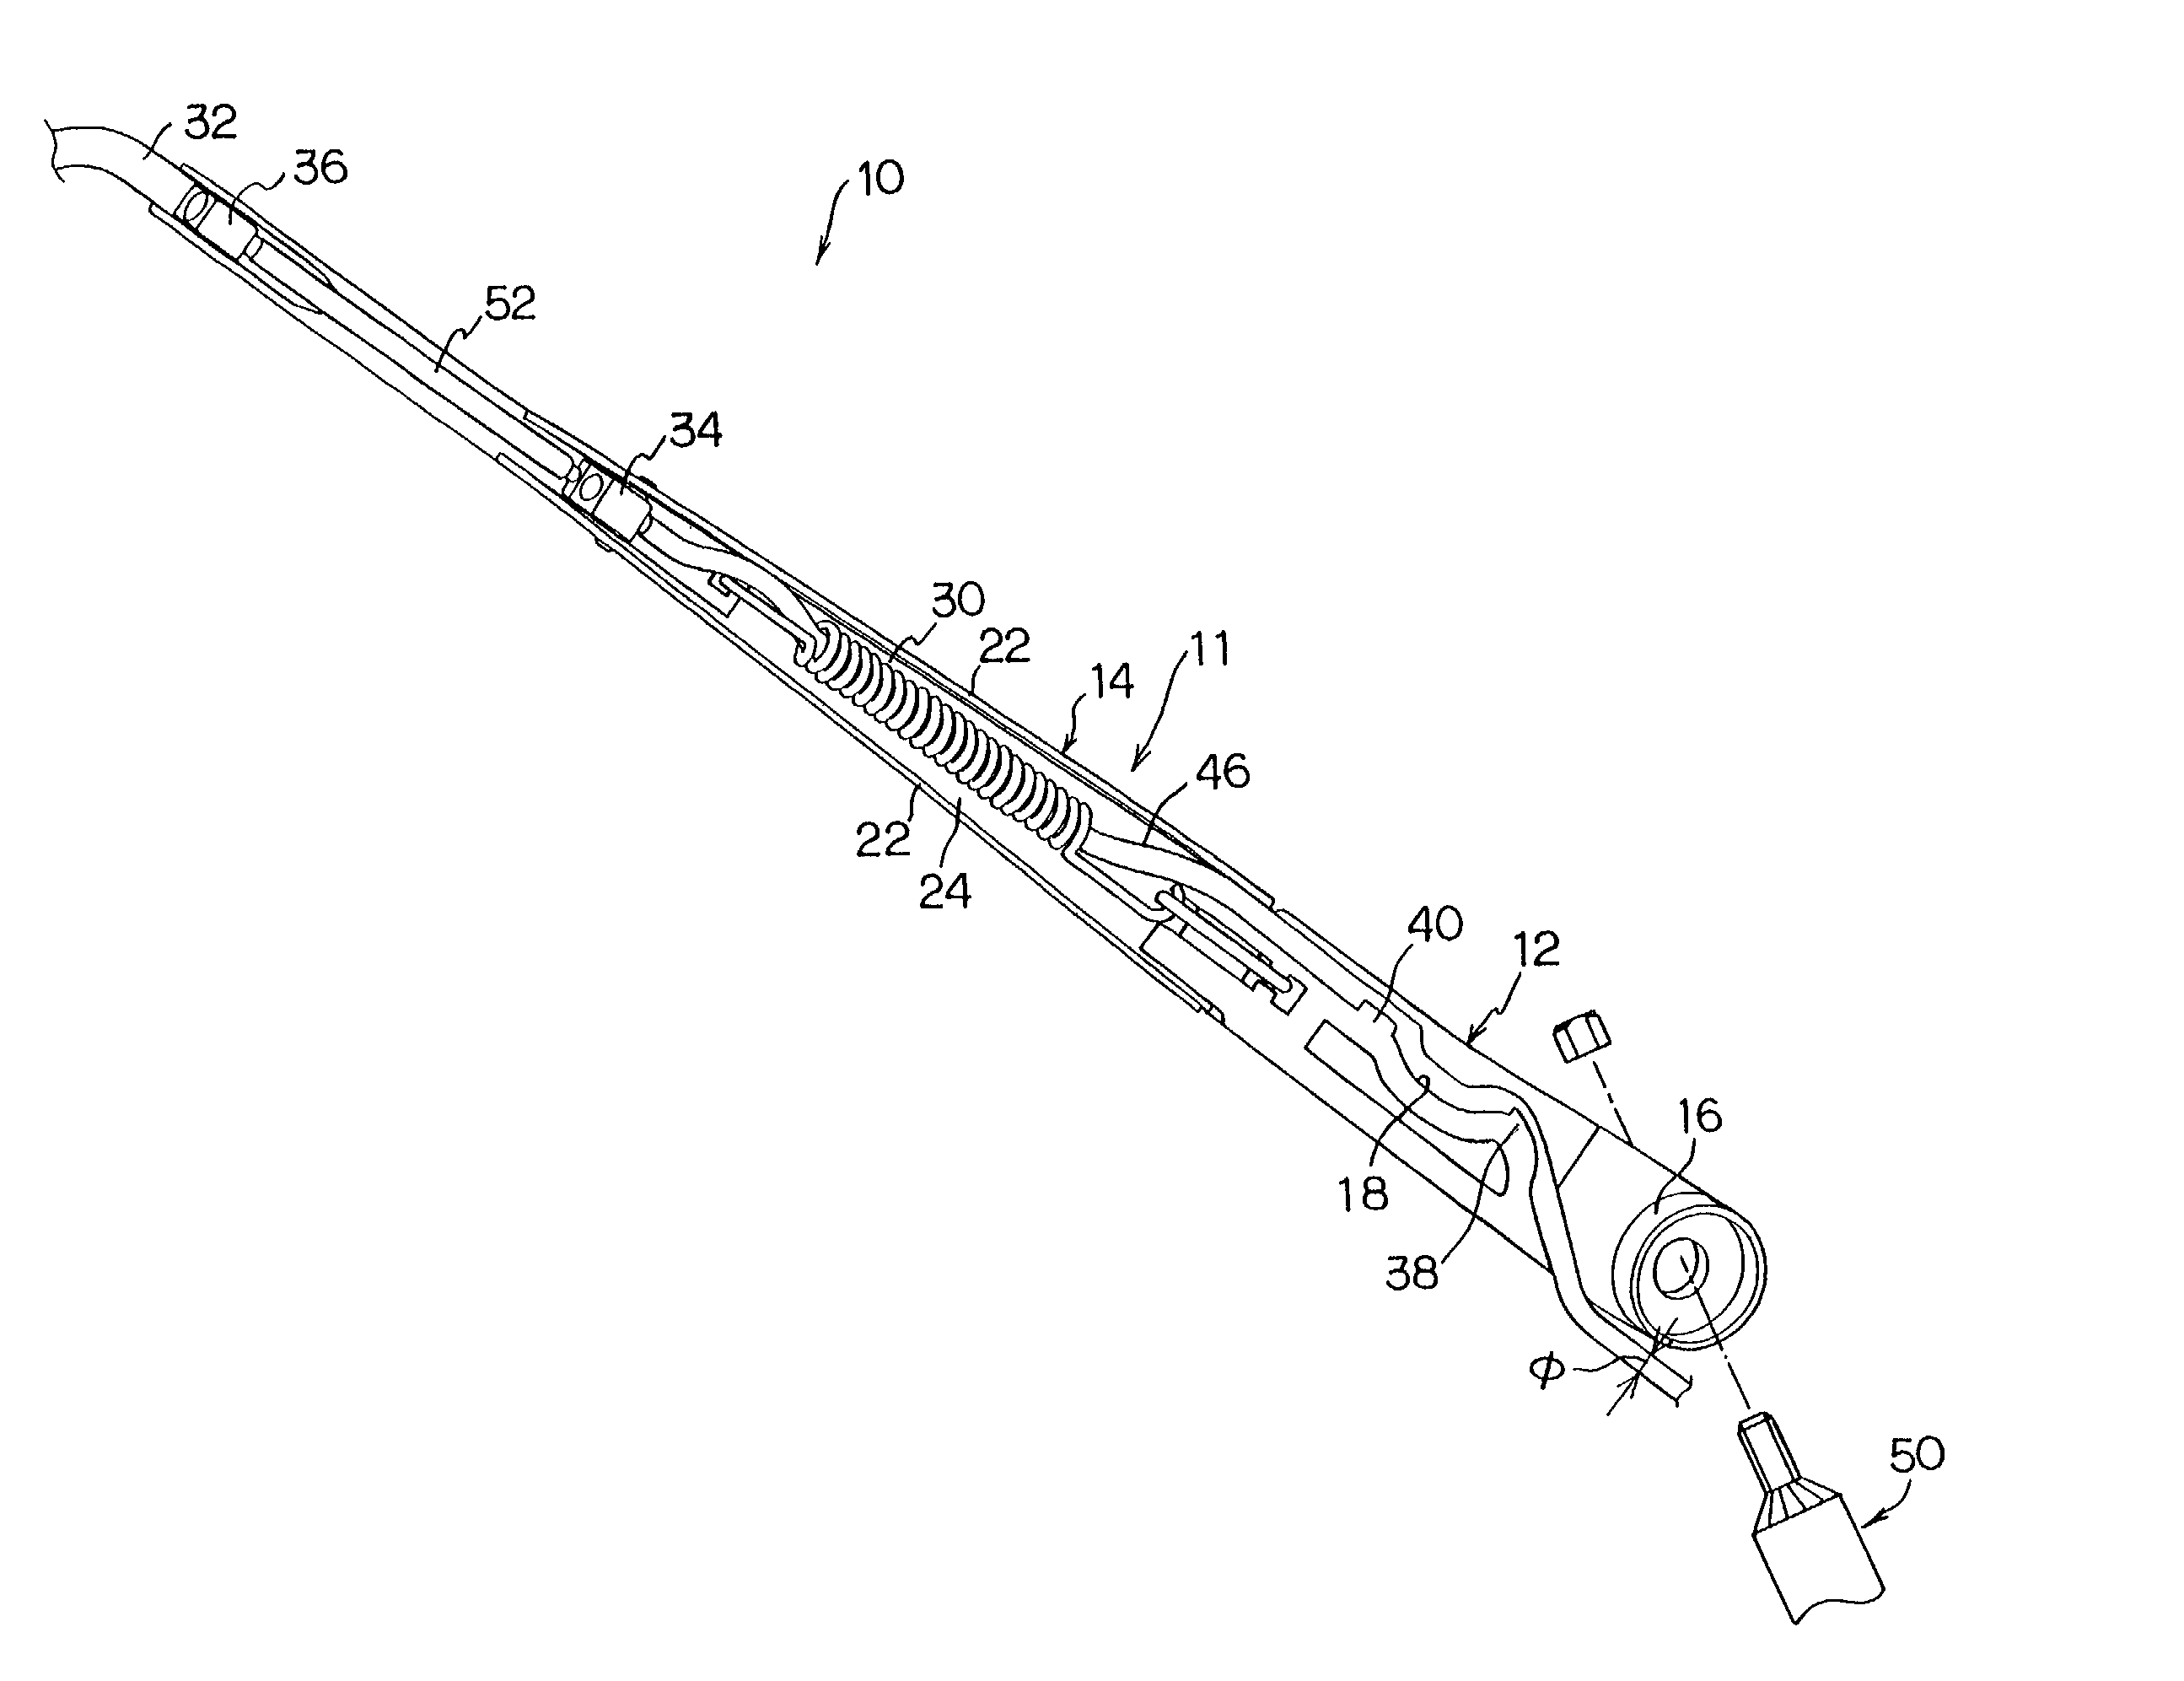 Windshield wiper device mounting washer nozzle and hose